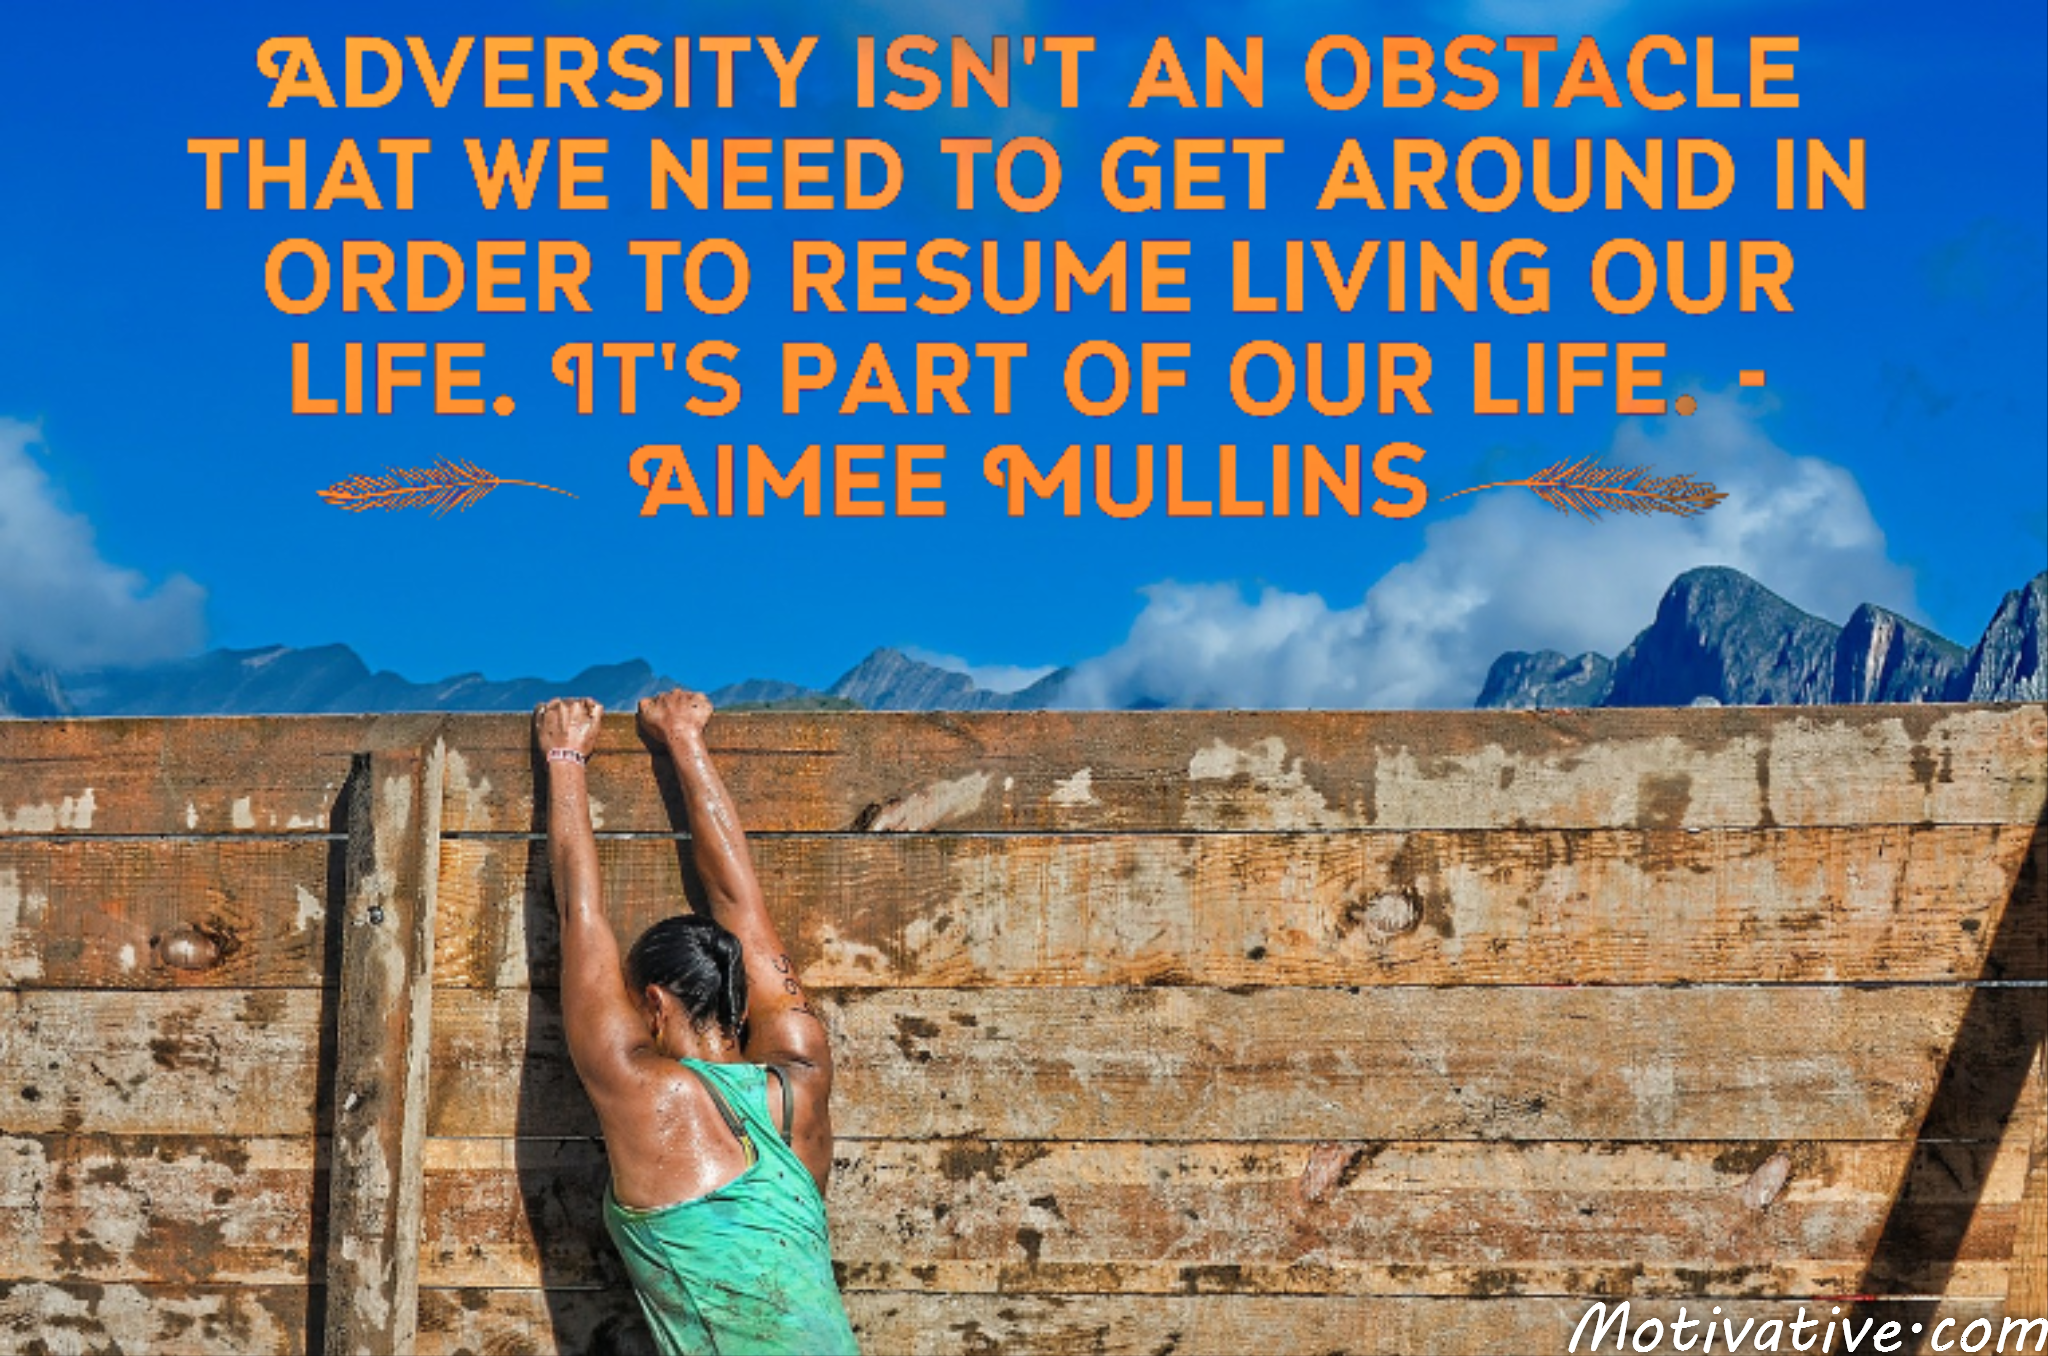 Adversity isn’t an obstacle that we need to get around in order to resume living our life. It’s part of our life. – Aimee Mullins